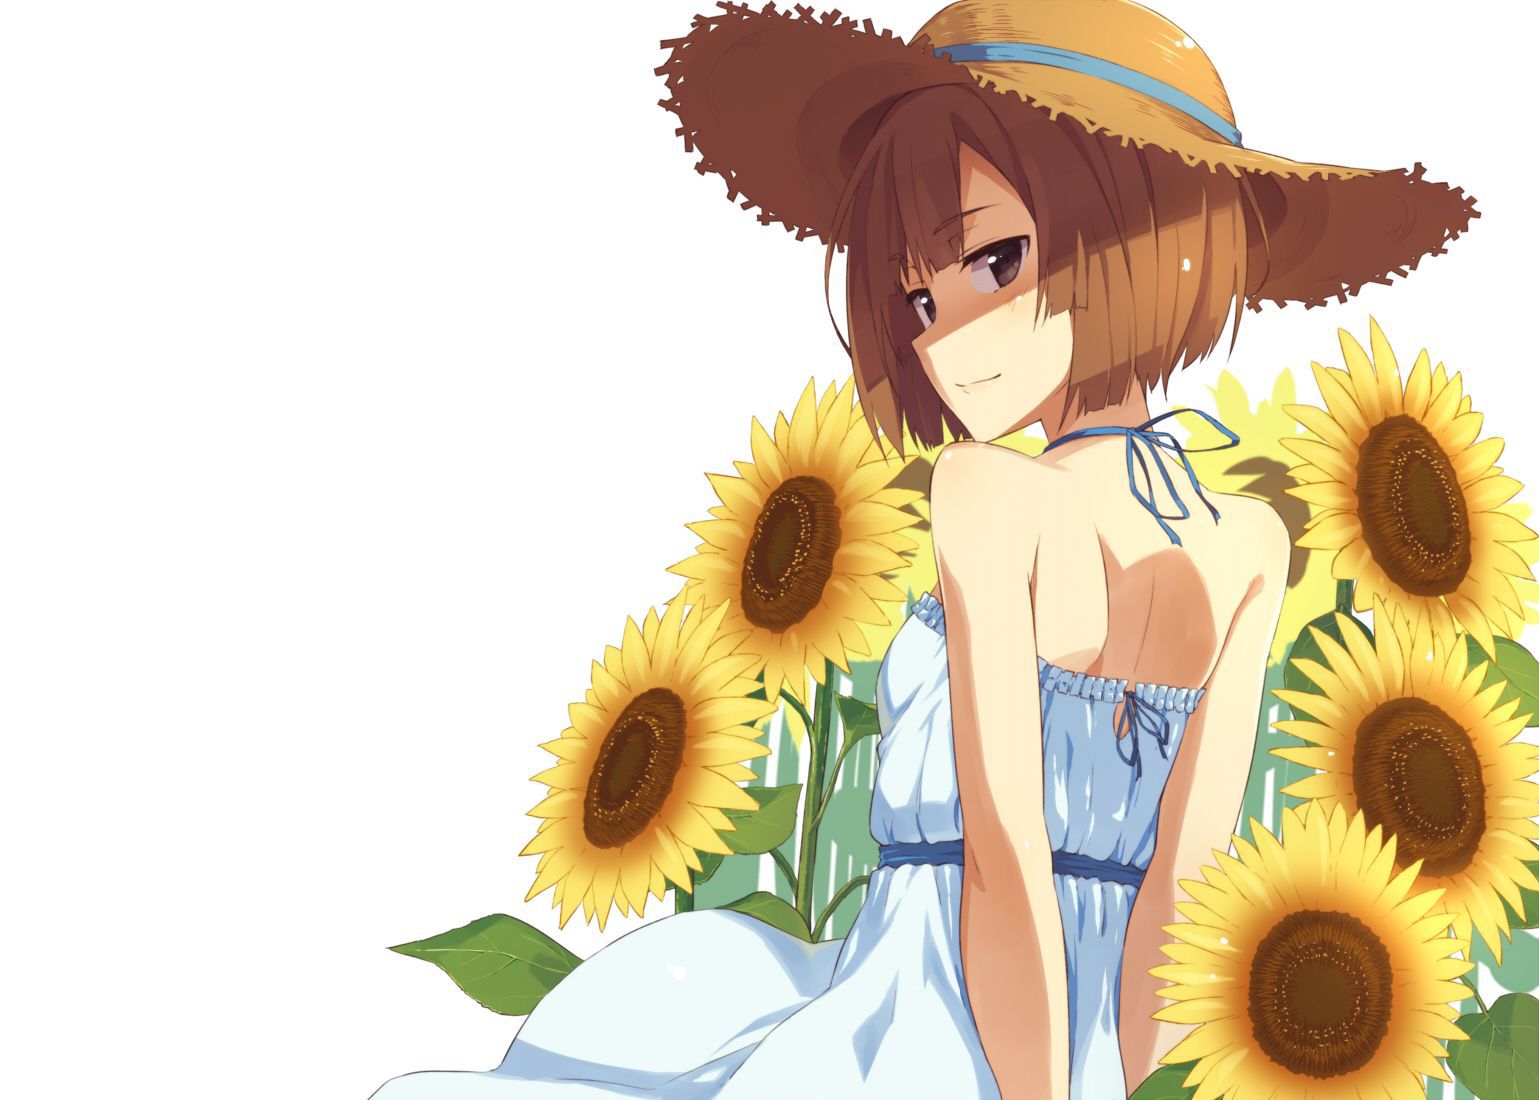 [Secondary, ZIP] summer 2: girl with a sunflower or image summary 40